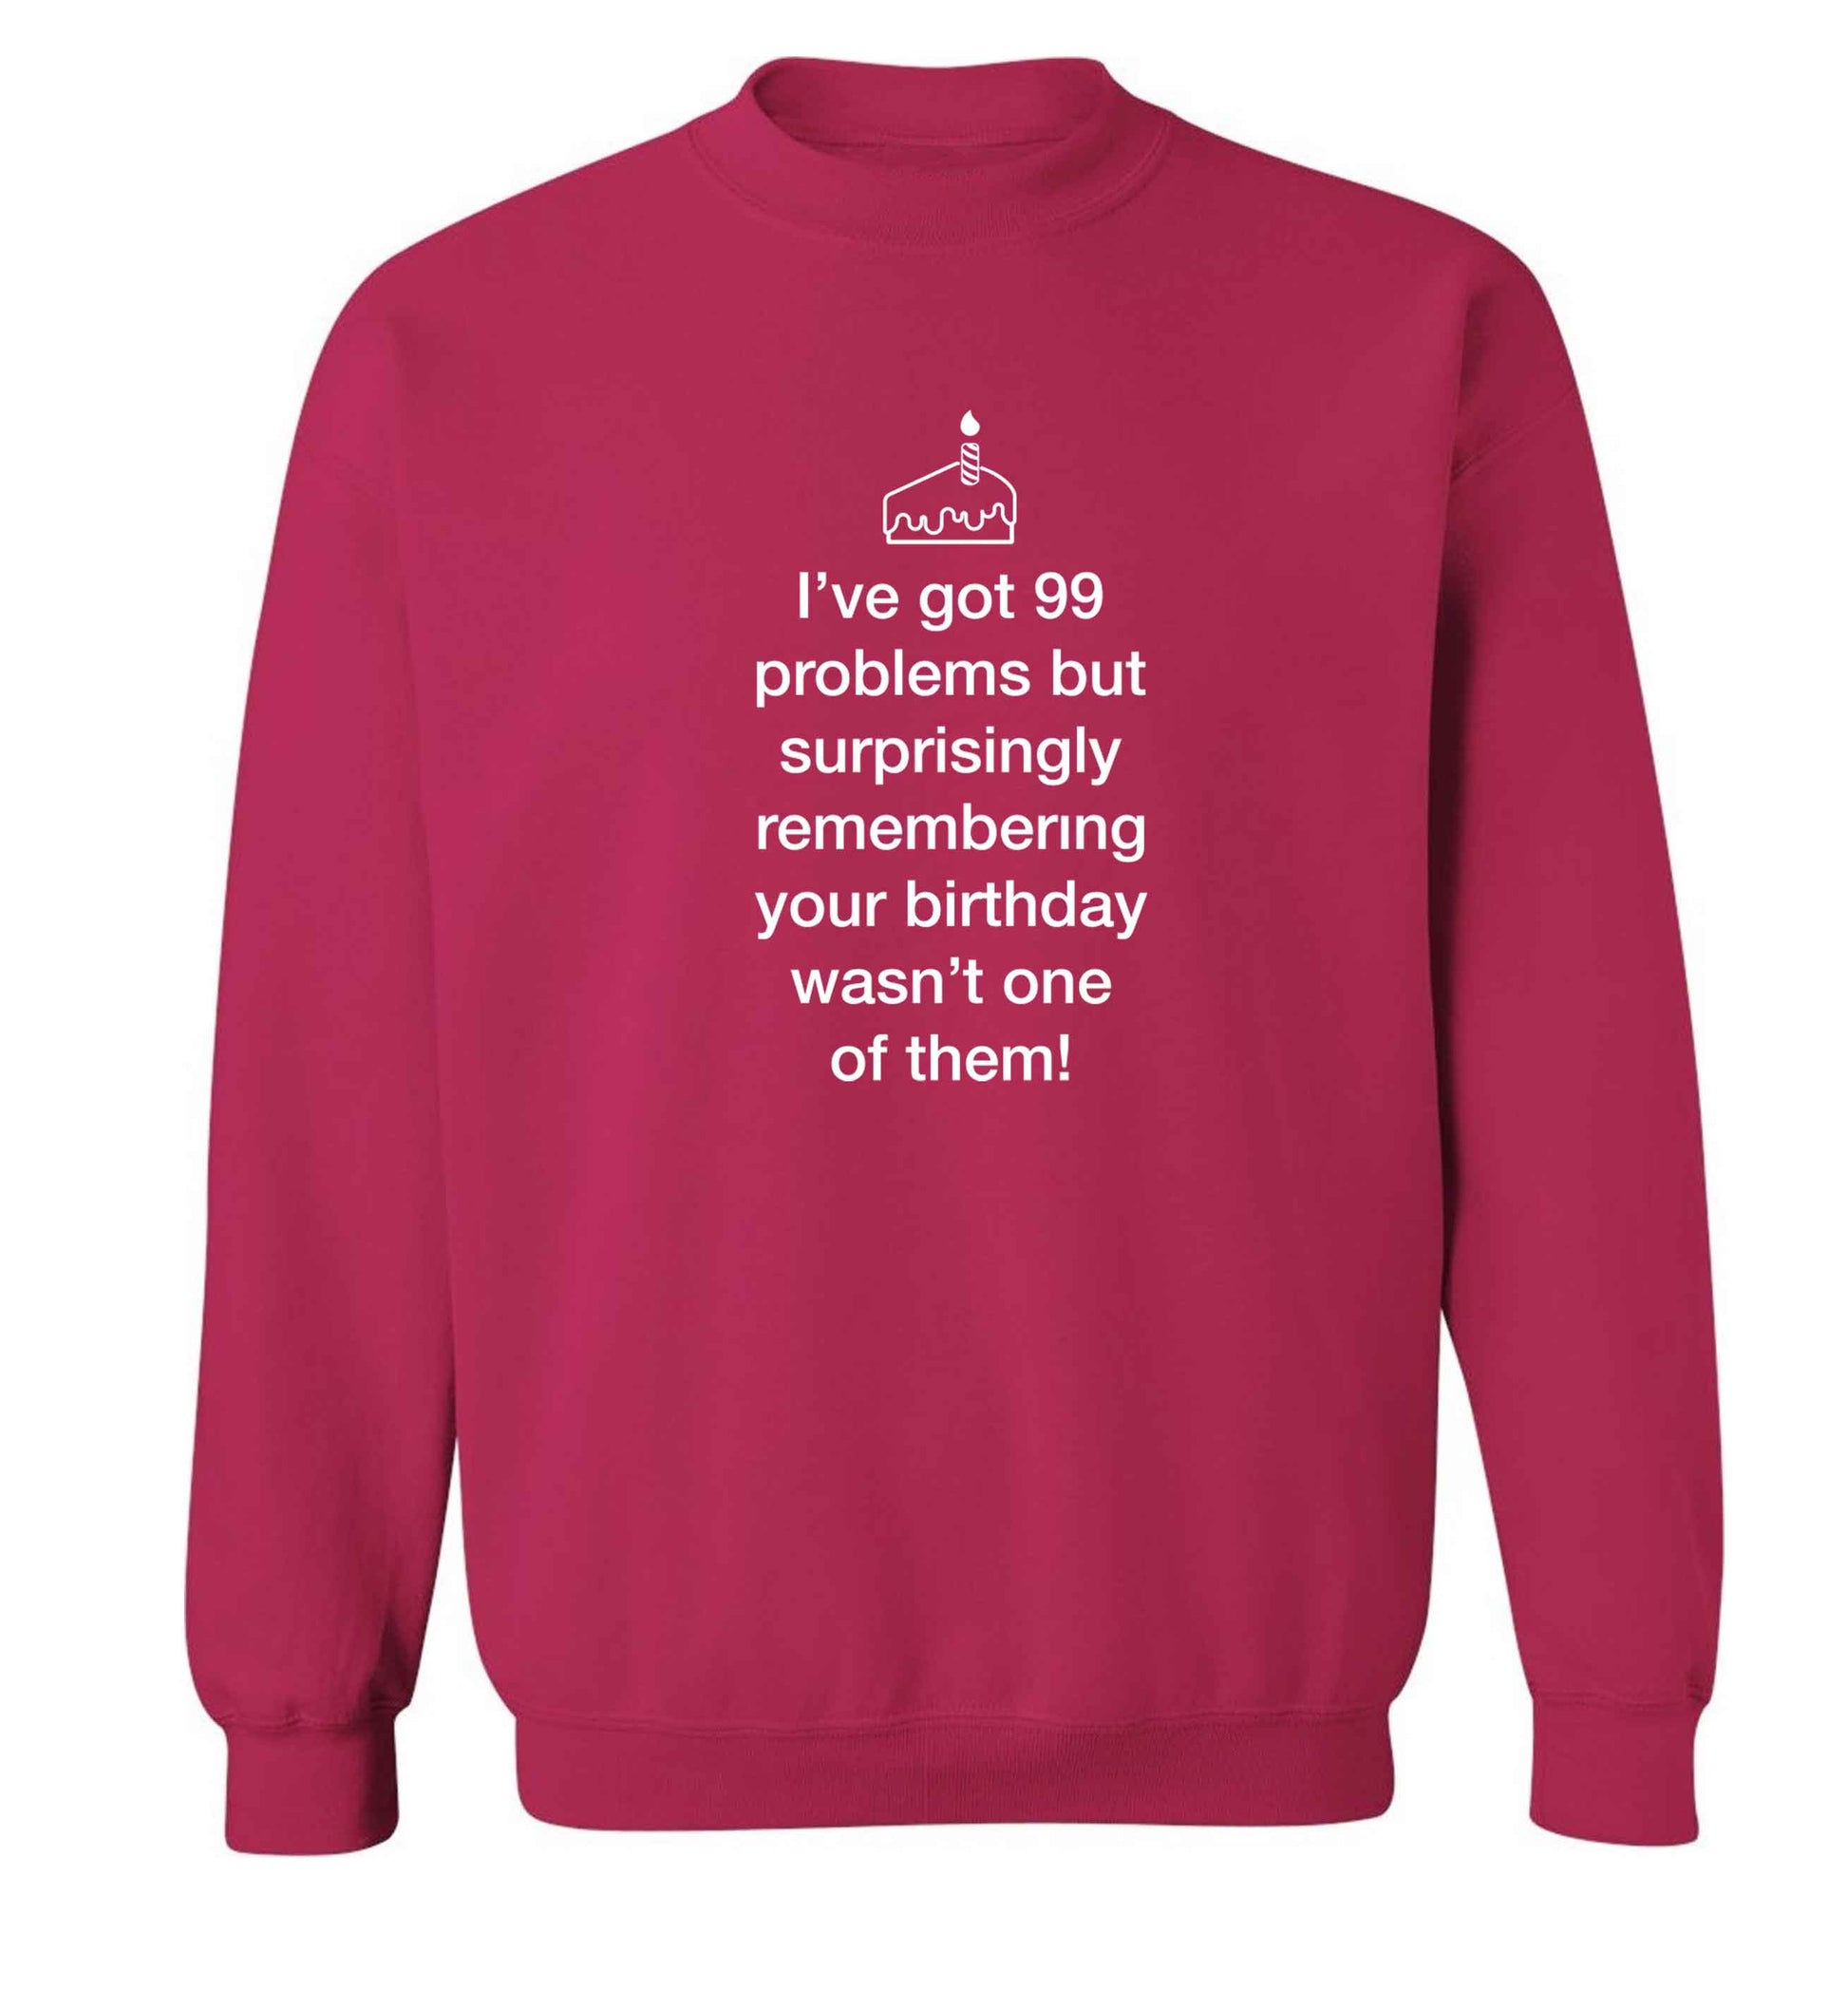 I've got 99 problems but surprisingly remembering your birthday wasn't one of them! adult's unisex pink sweater 2XL